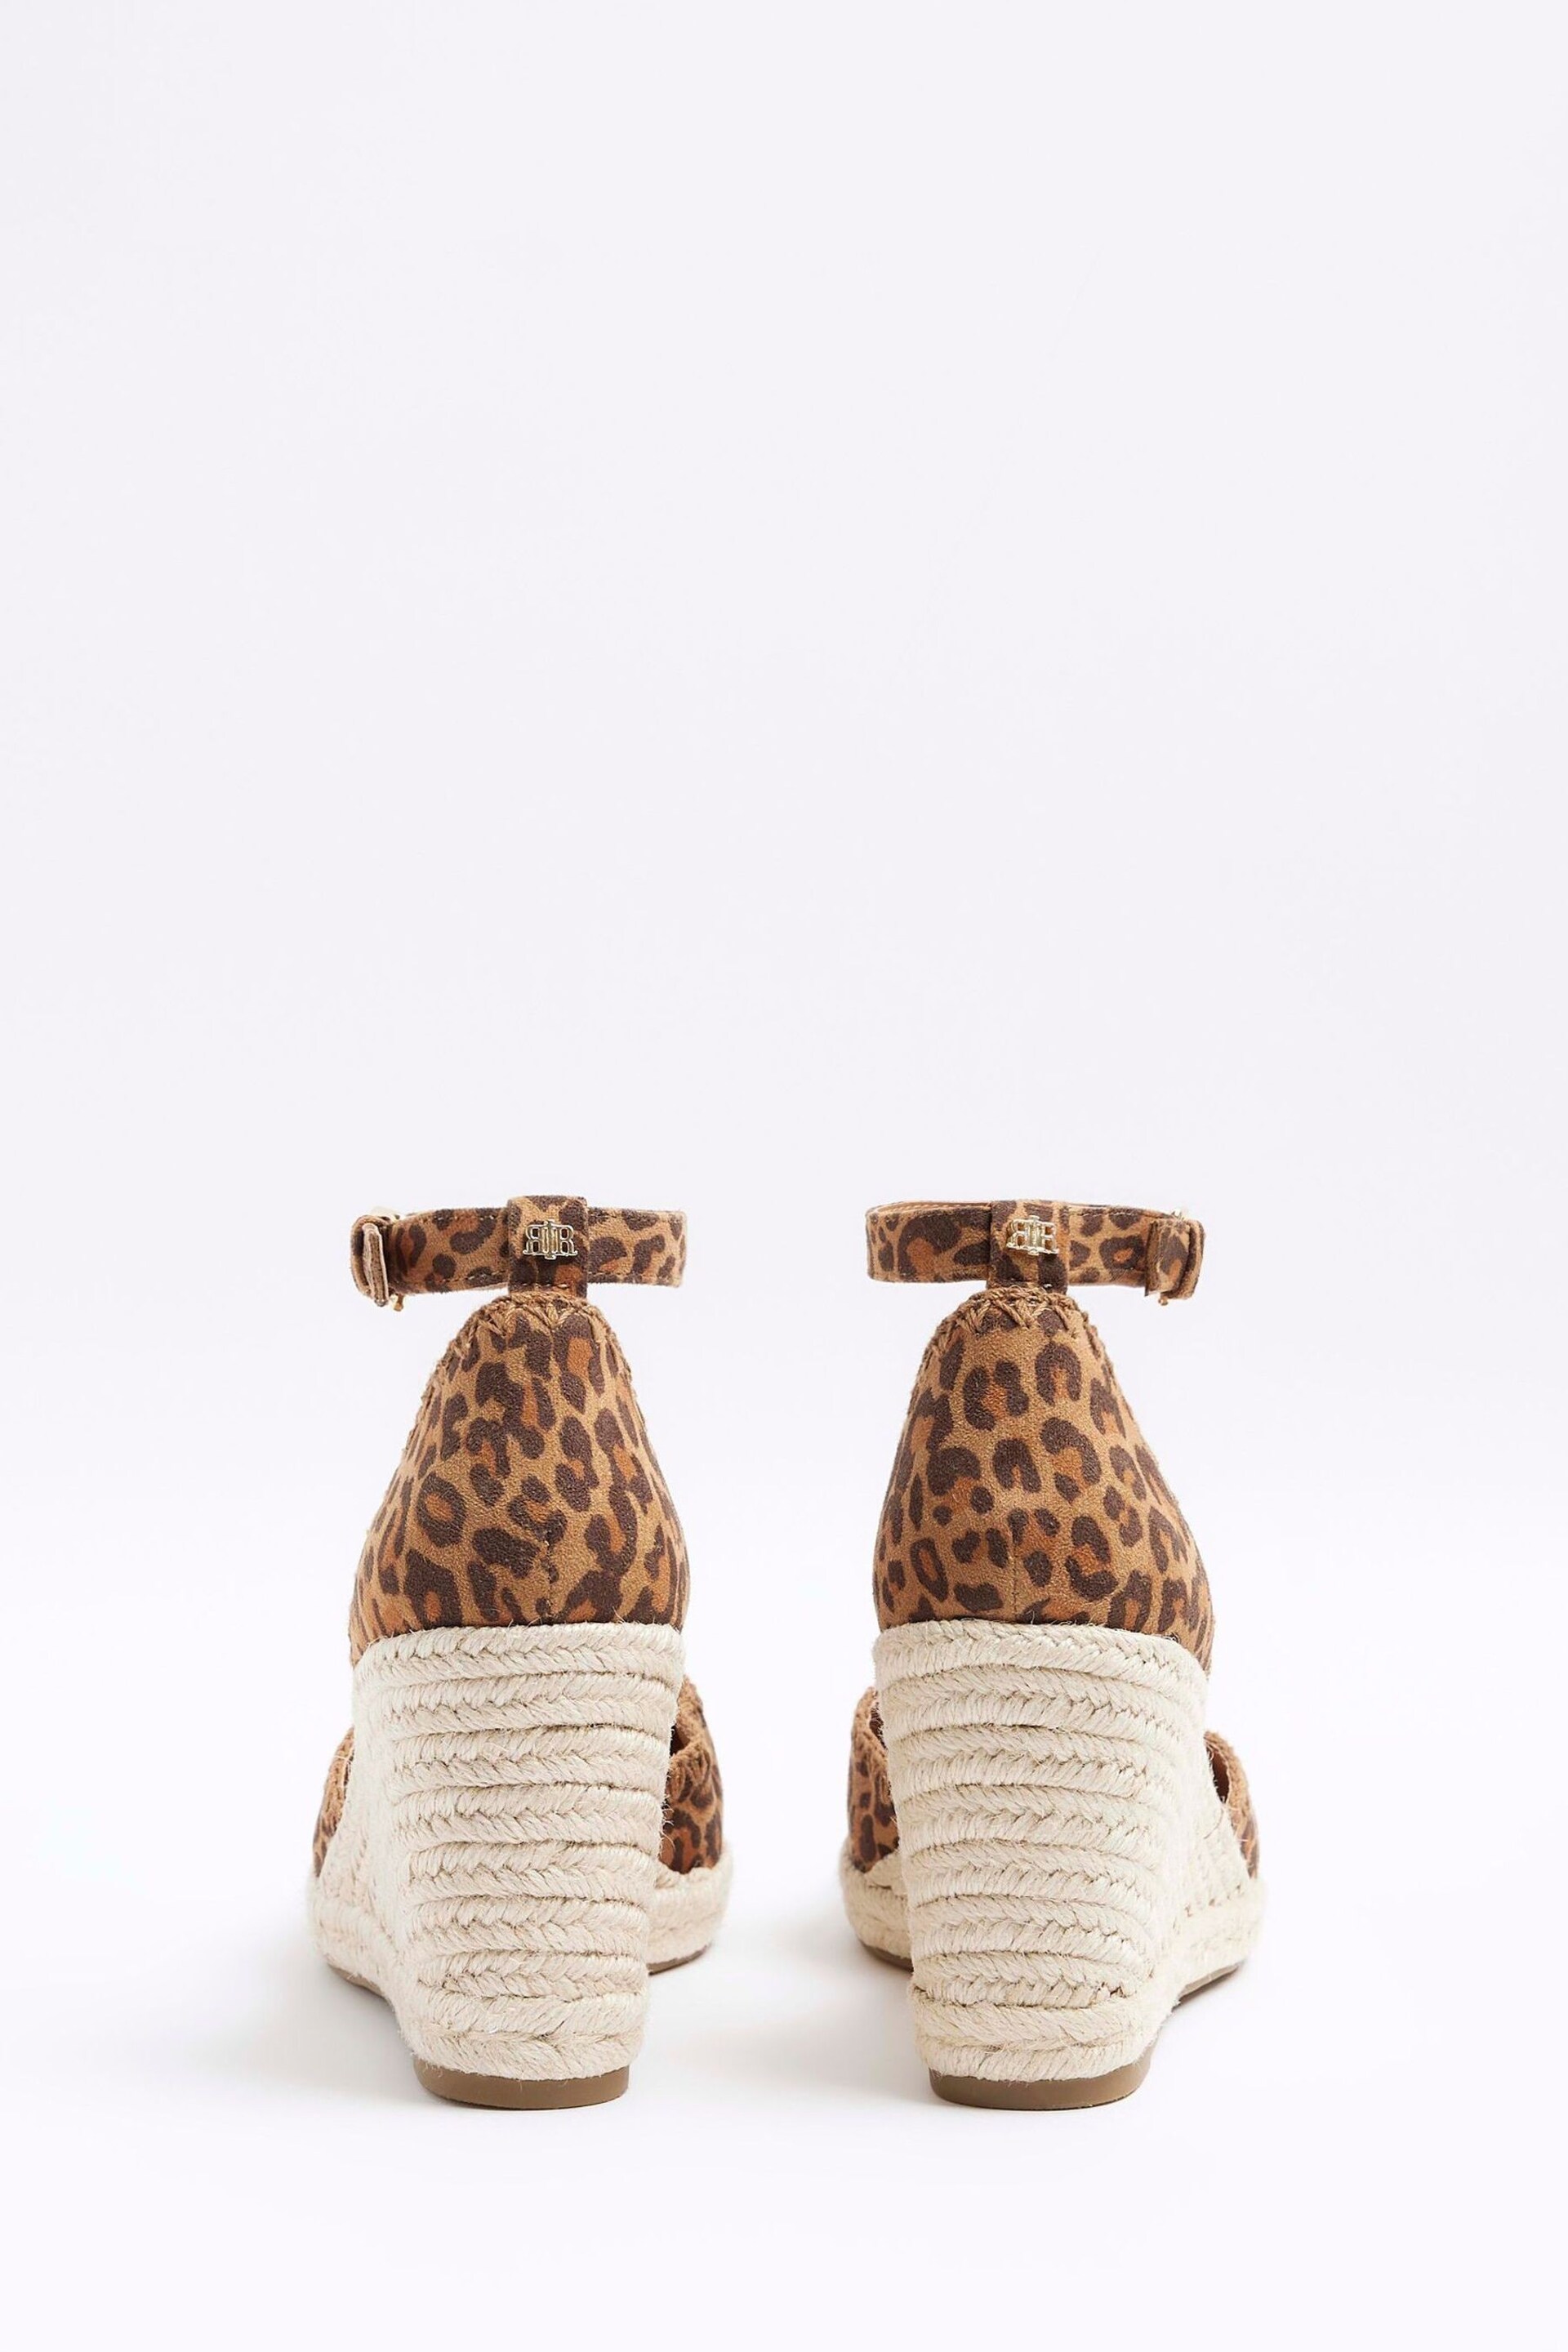 River Island Brown Espadrille Wedge Sandals - Image 4 of 5